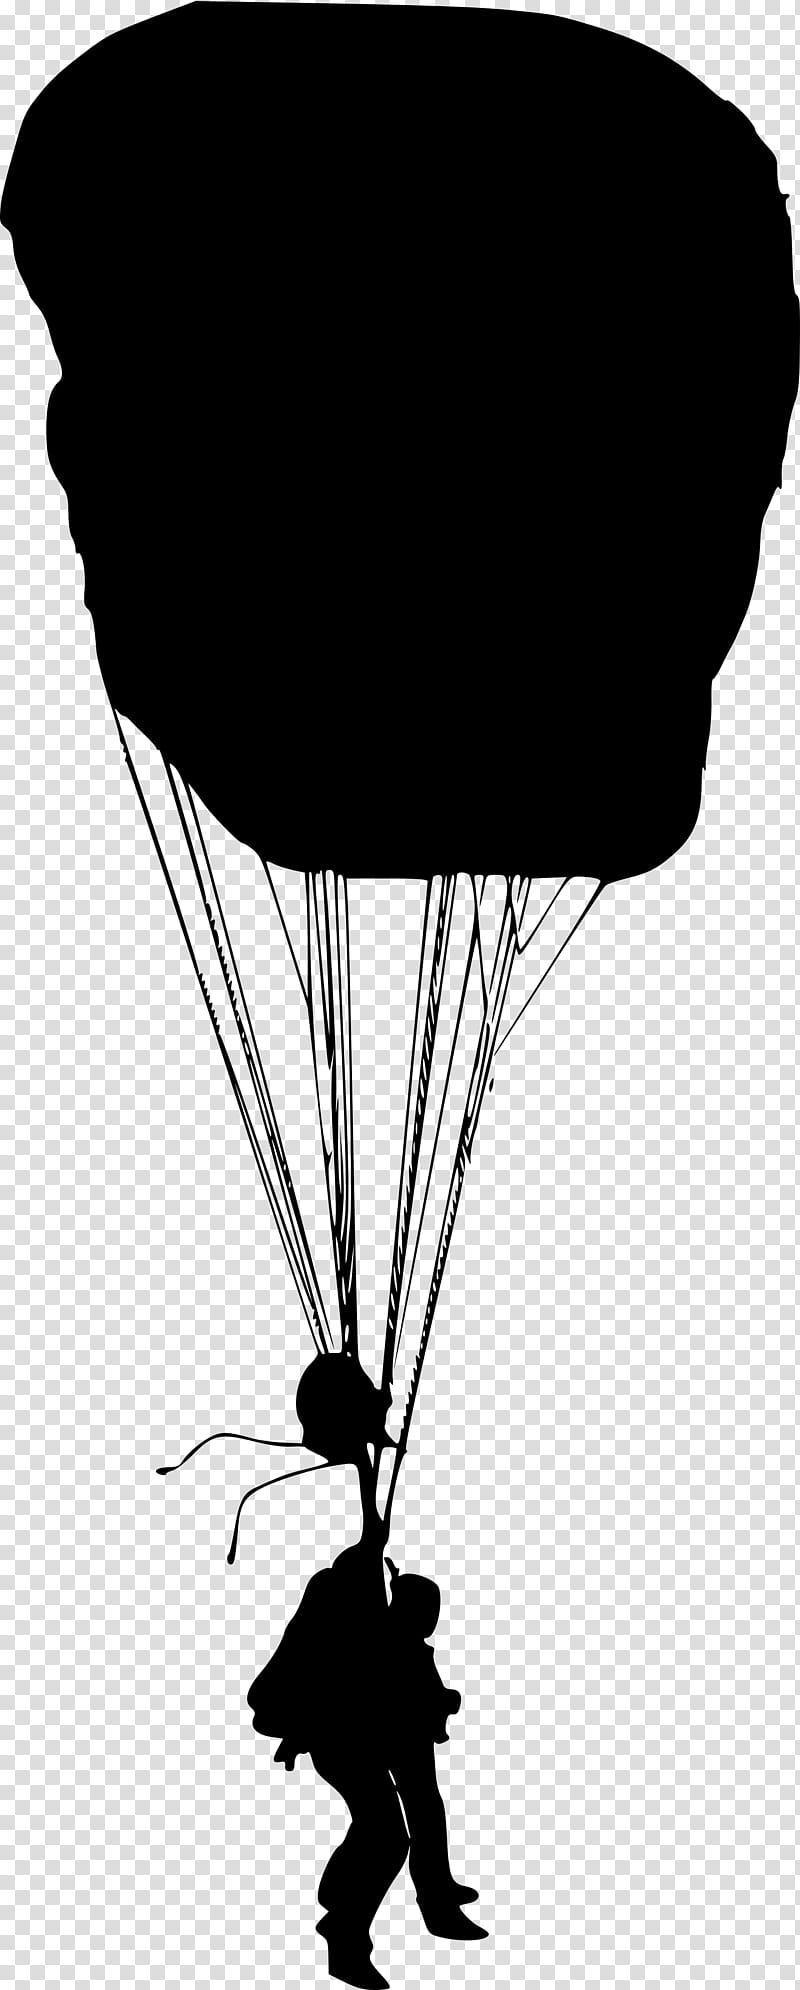 Balloon Black And White, Leather Redblue, Silhouette, Paratrooper, Black White M, Parachuting, Parachute, Green transparent background PNG clipart